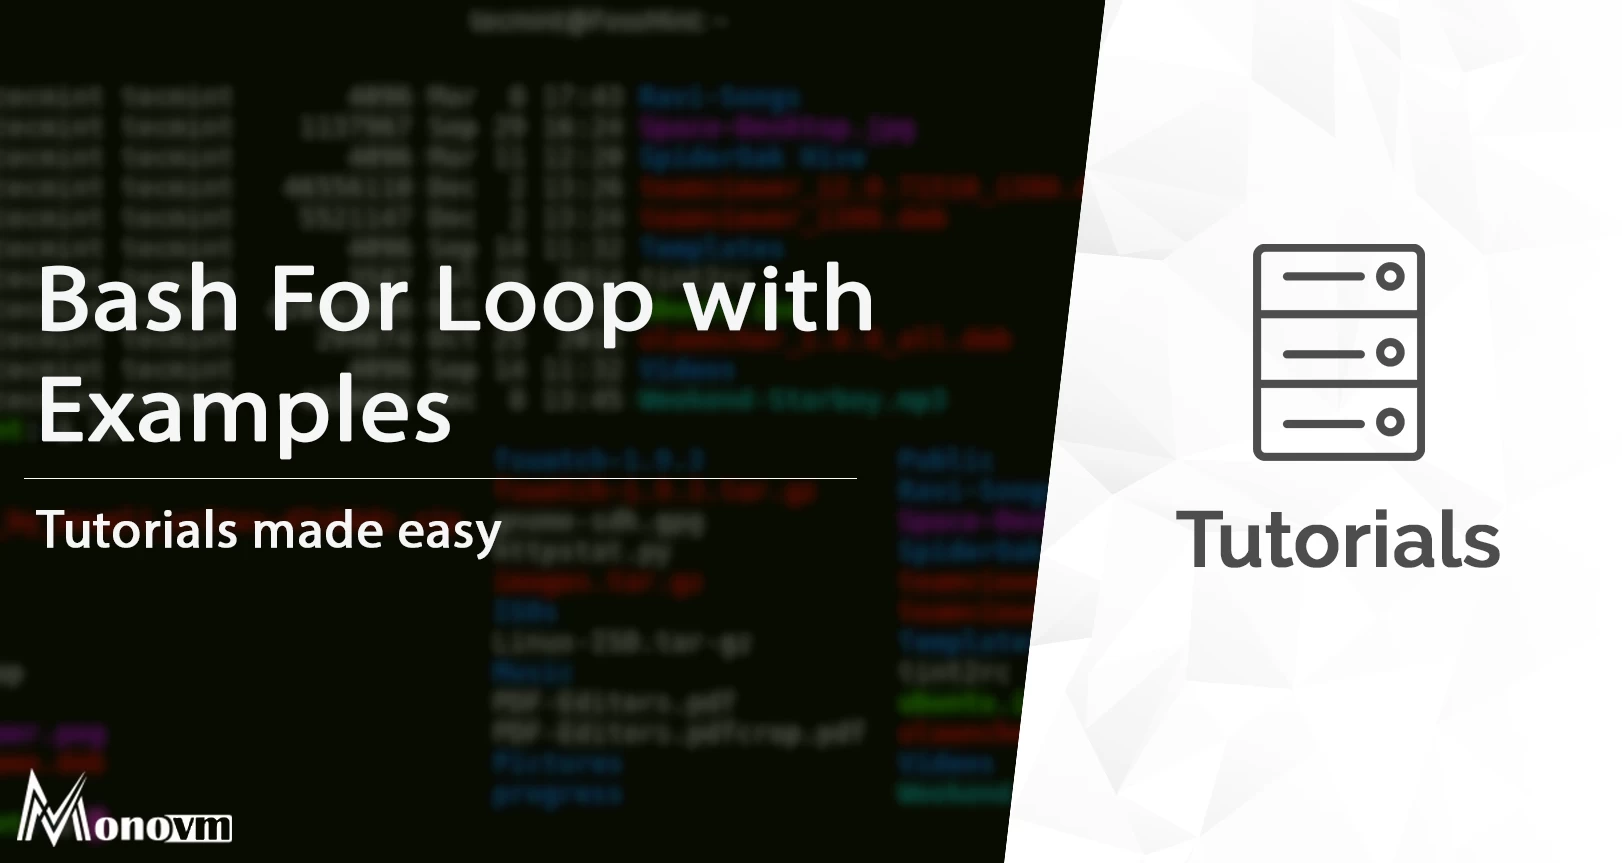 Bash For Loop with Examples